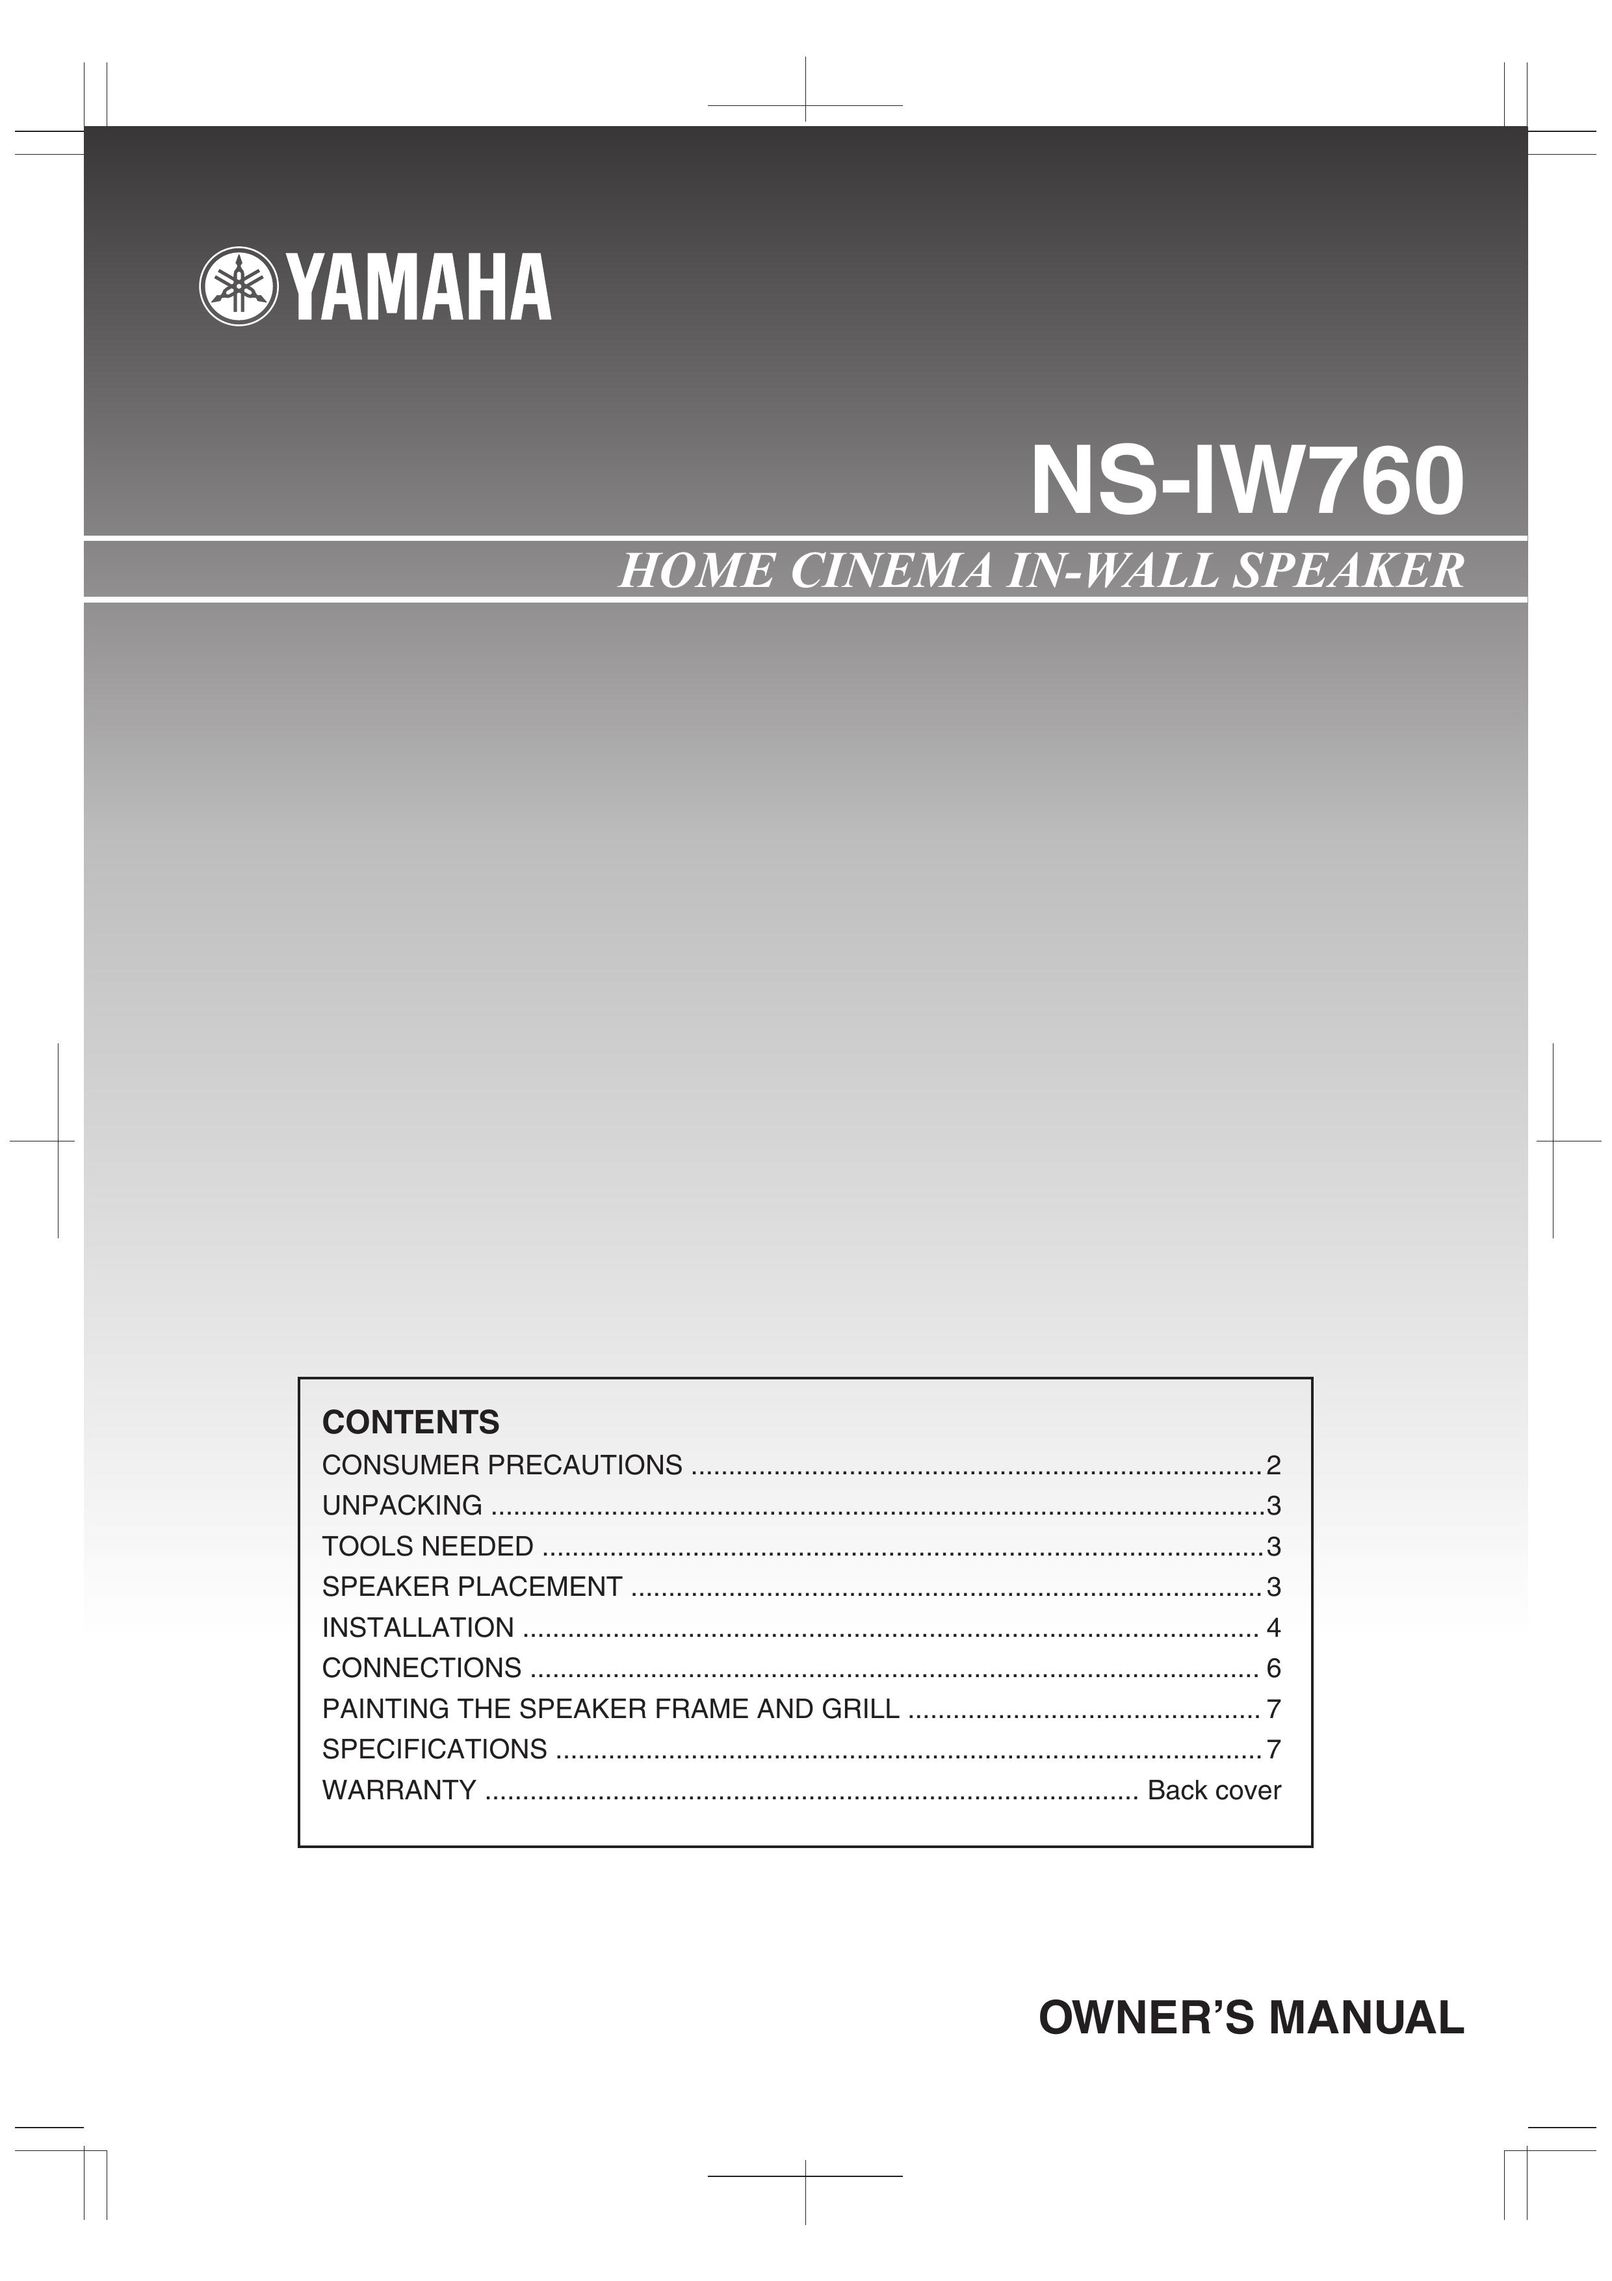 Yamaha NS-IW760 Home Theater System User Manual